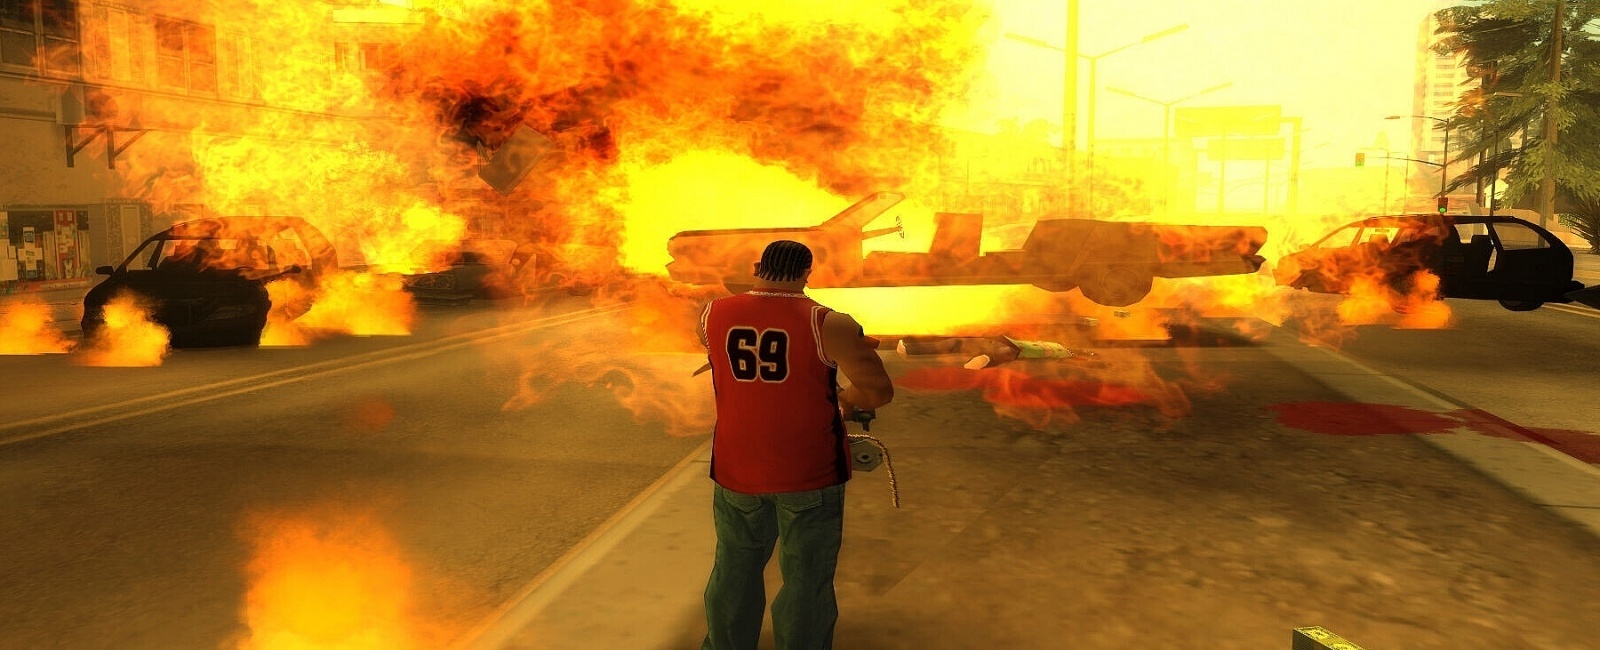 10 Best GTA San Andreas Mods To Try In 2022